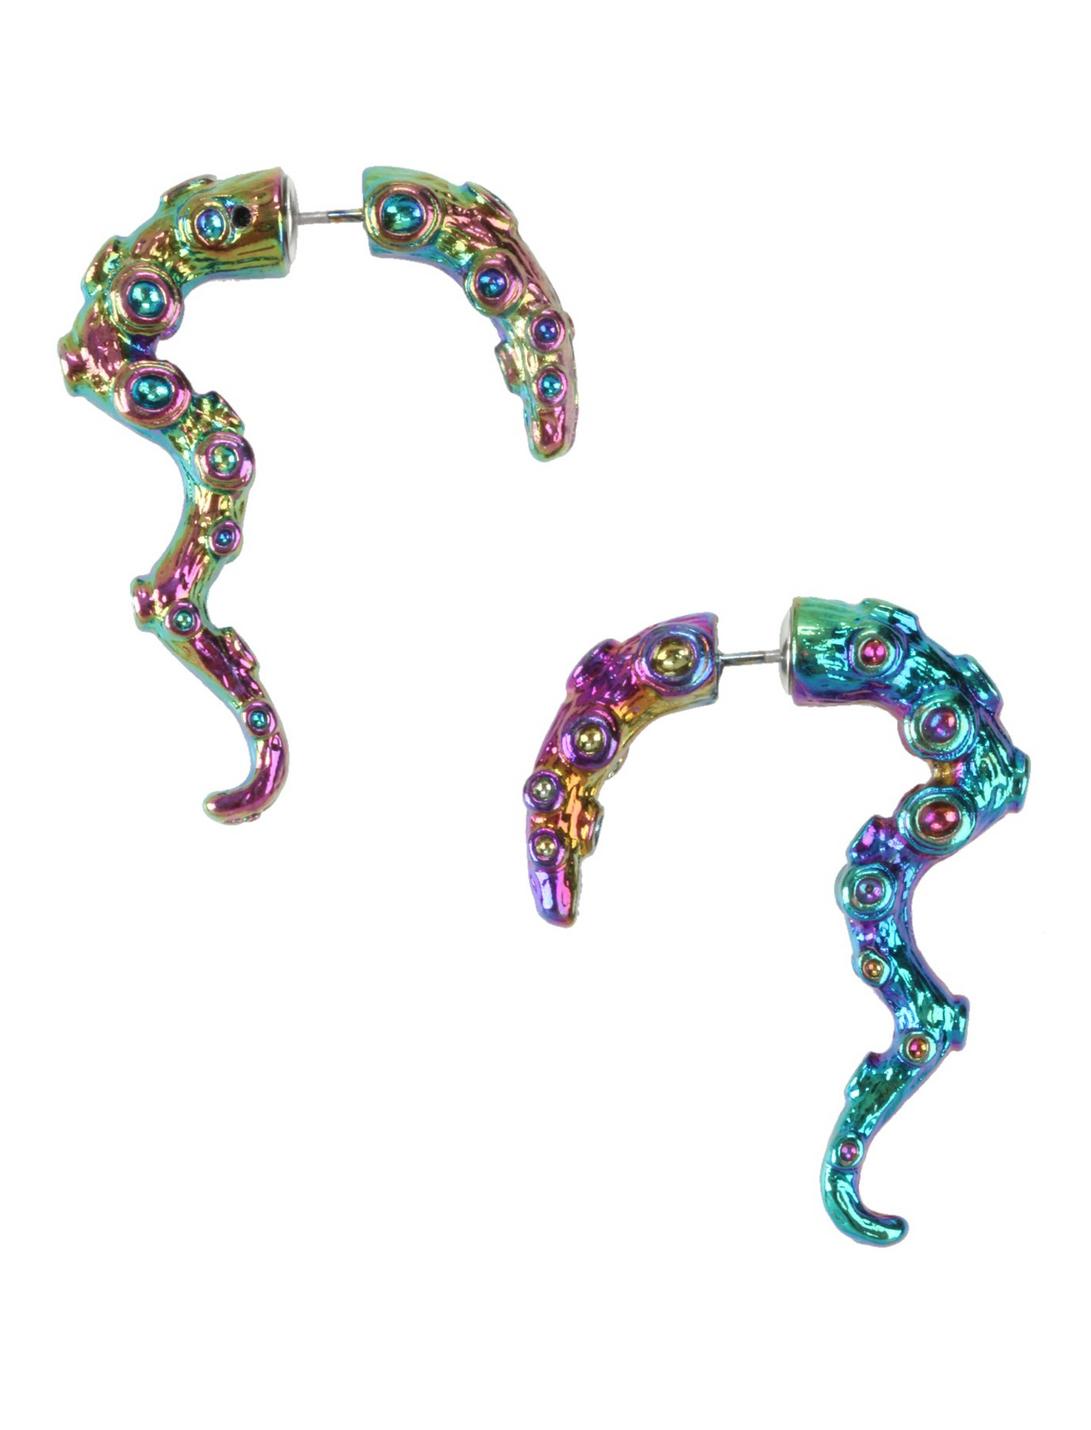 Blackheart Anodized Octopus Tunnel Earring 2 Pack, , hi-res